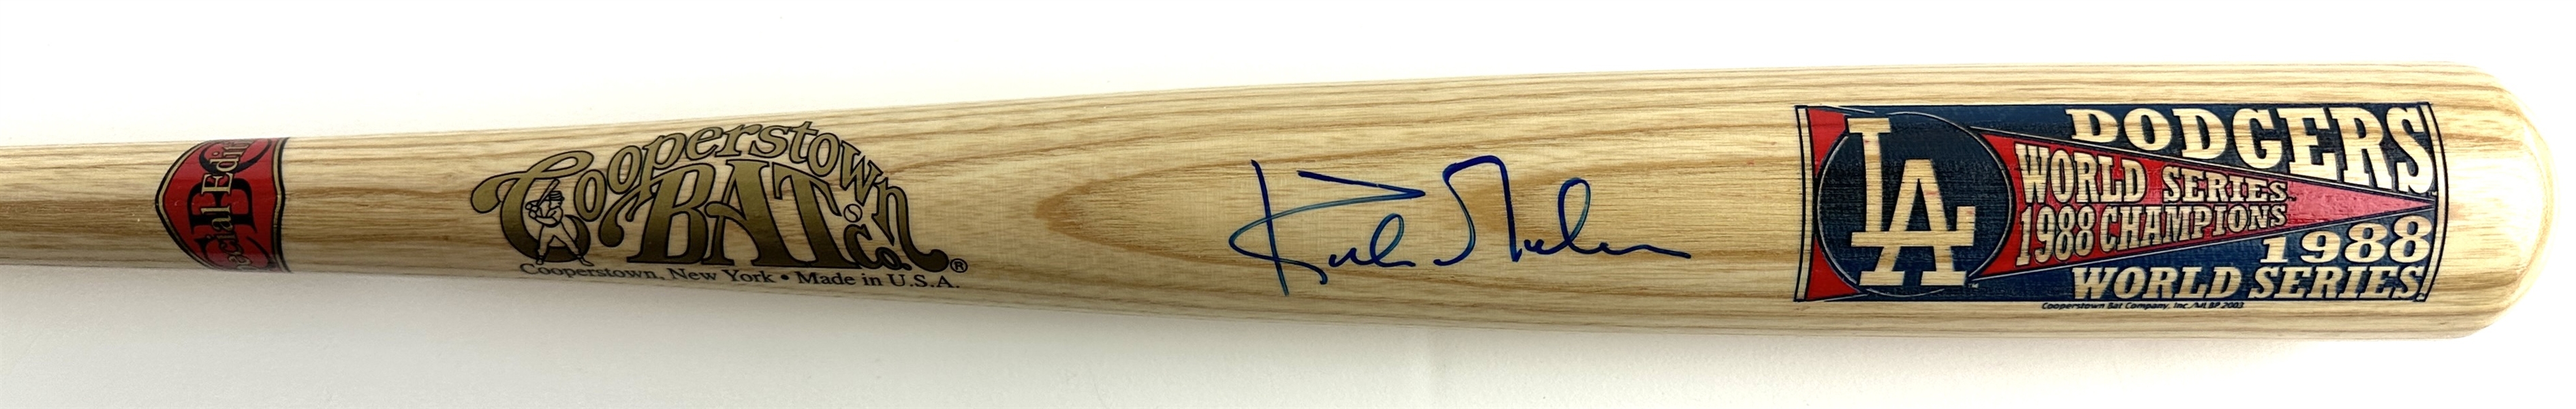 Kirk Gibson Signed Cooperstown Bat Company 1988 World Series Commemorative Bat (Third Party Guaranteed)